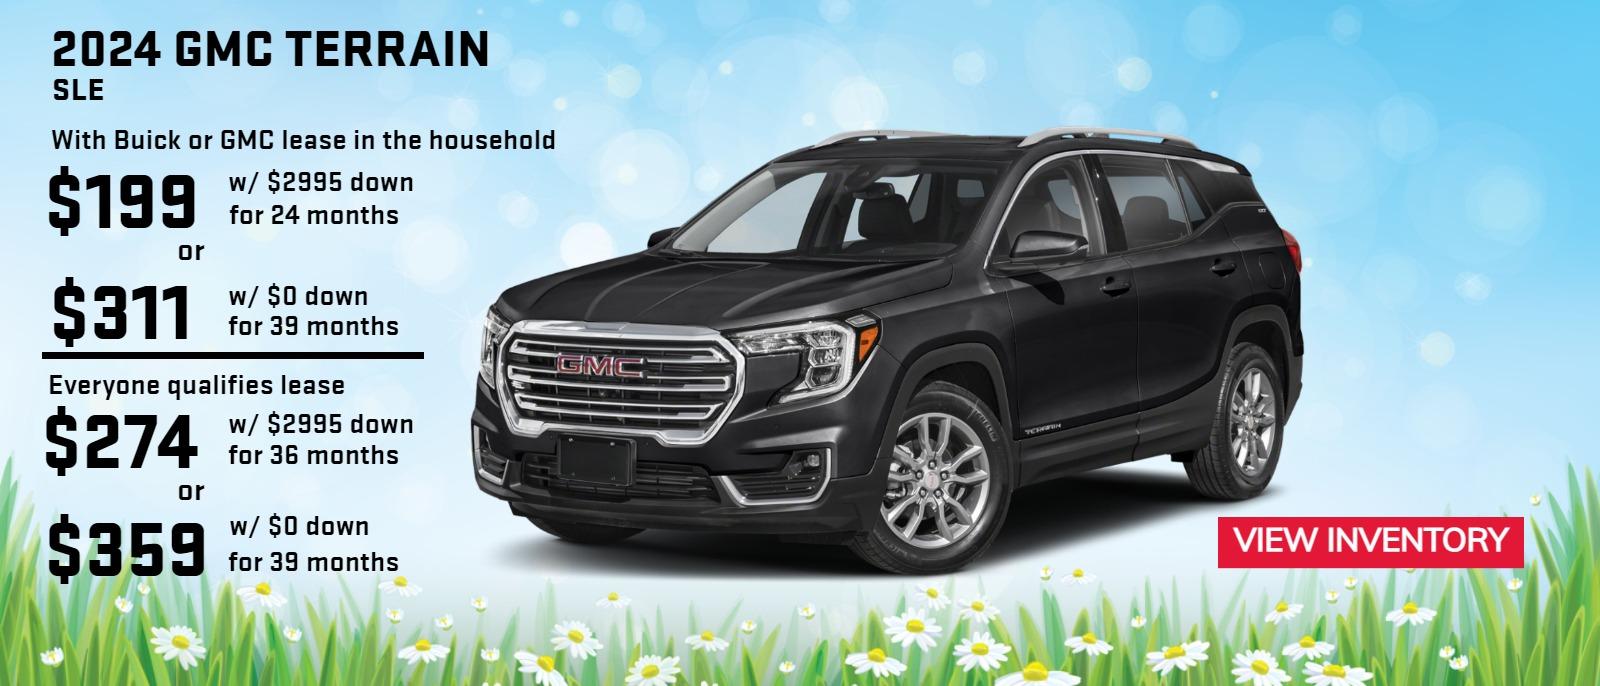 2024 GMC Terrain SLE - With Buick or GMC lease in the household $199 w/ $2995 down for 24 months or $311 with $0 down for 39 months. Everyone qualifies lease $274 w/$2995 for 36 months or $359 with $0 down for 39 months.